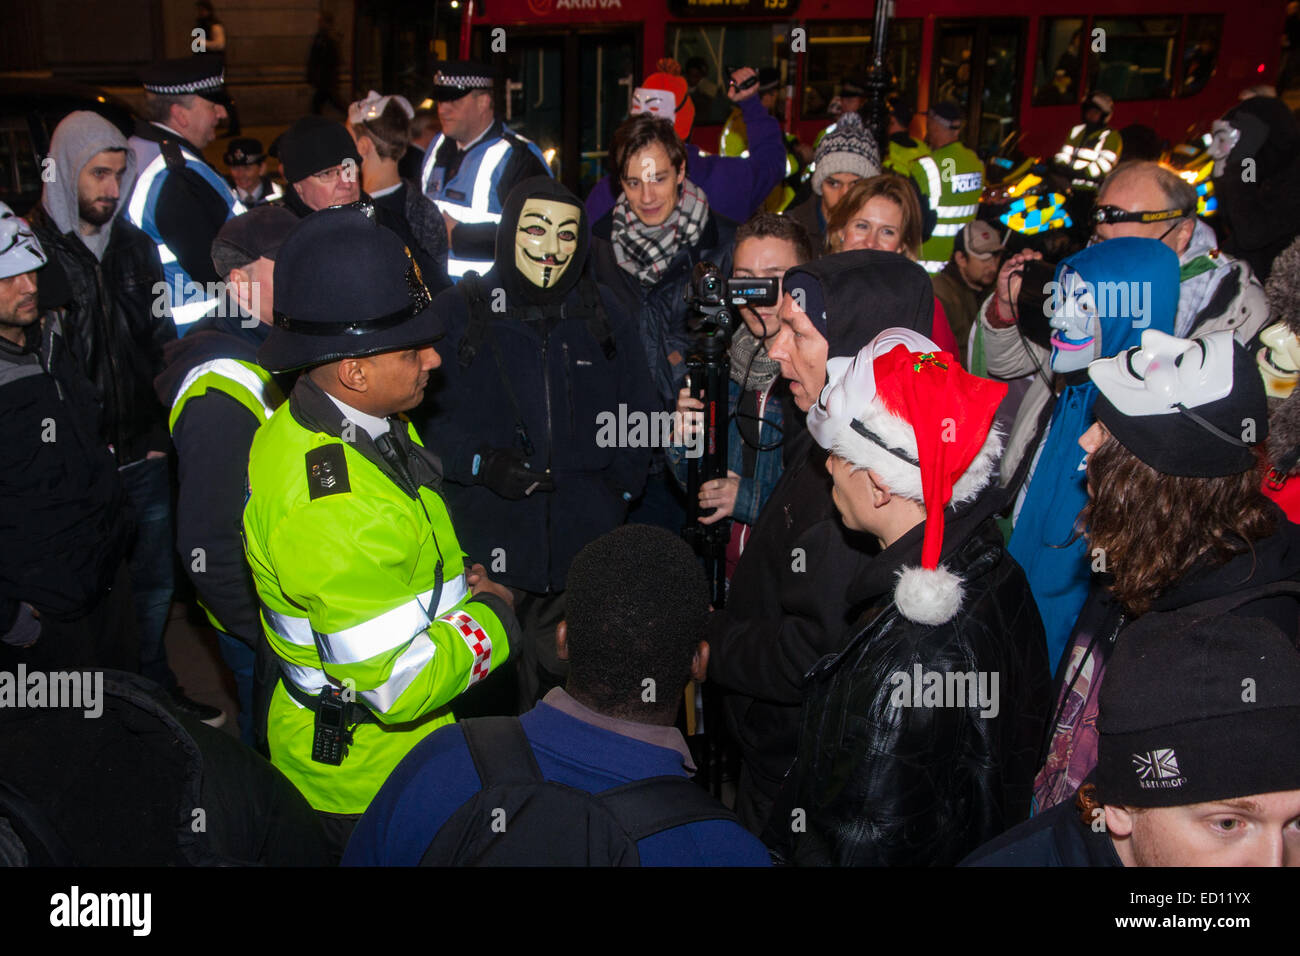 London, UK. 23rd Dec, 2014. Online activism group Anonymous march through London from the City to the BBC's HQ on Great Portland Street in protest against alleged biases and coverups of a 'paedophile ring'. PICTURED: Protesters discuss their position with a City of London police officer. Credit:  Paul Davey/Alamy Live News Stock Photo